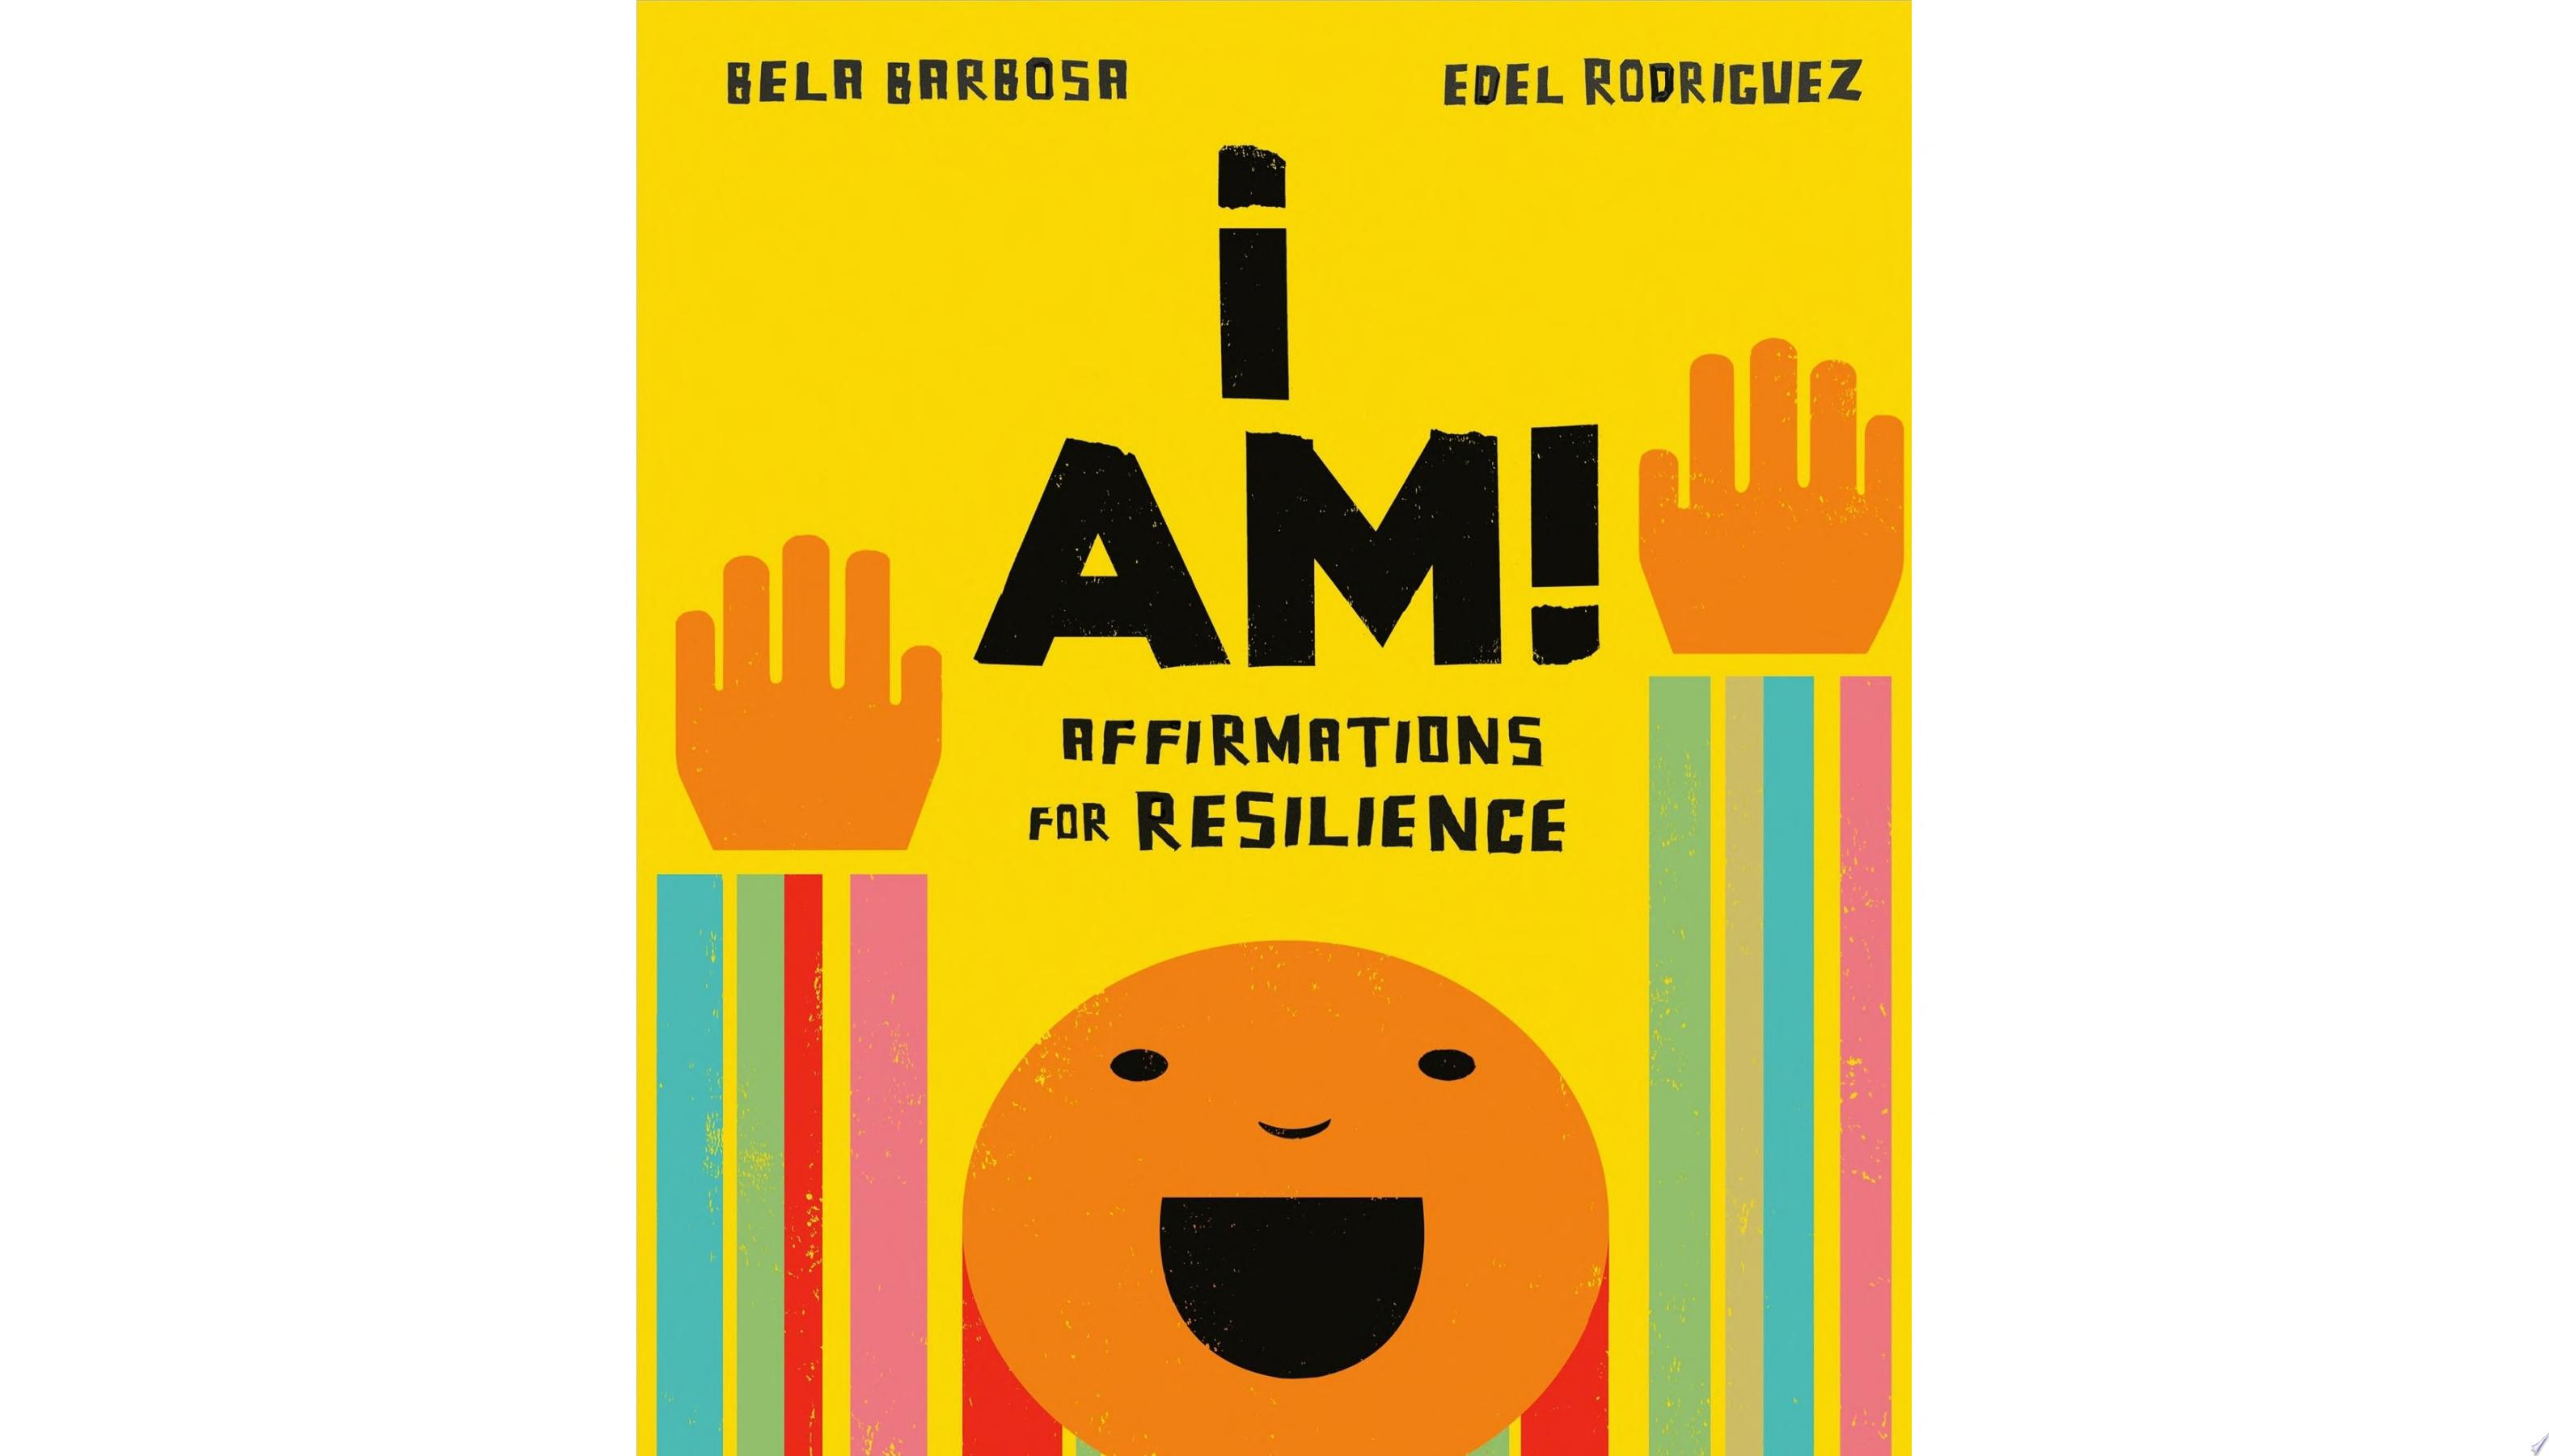 Image for "I Am!: Affirmations for Resilience"